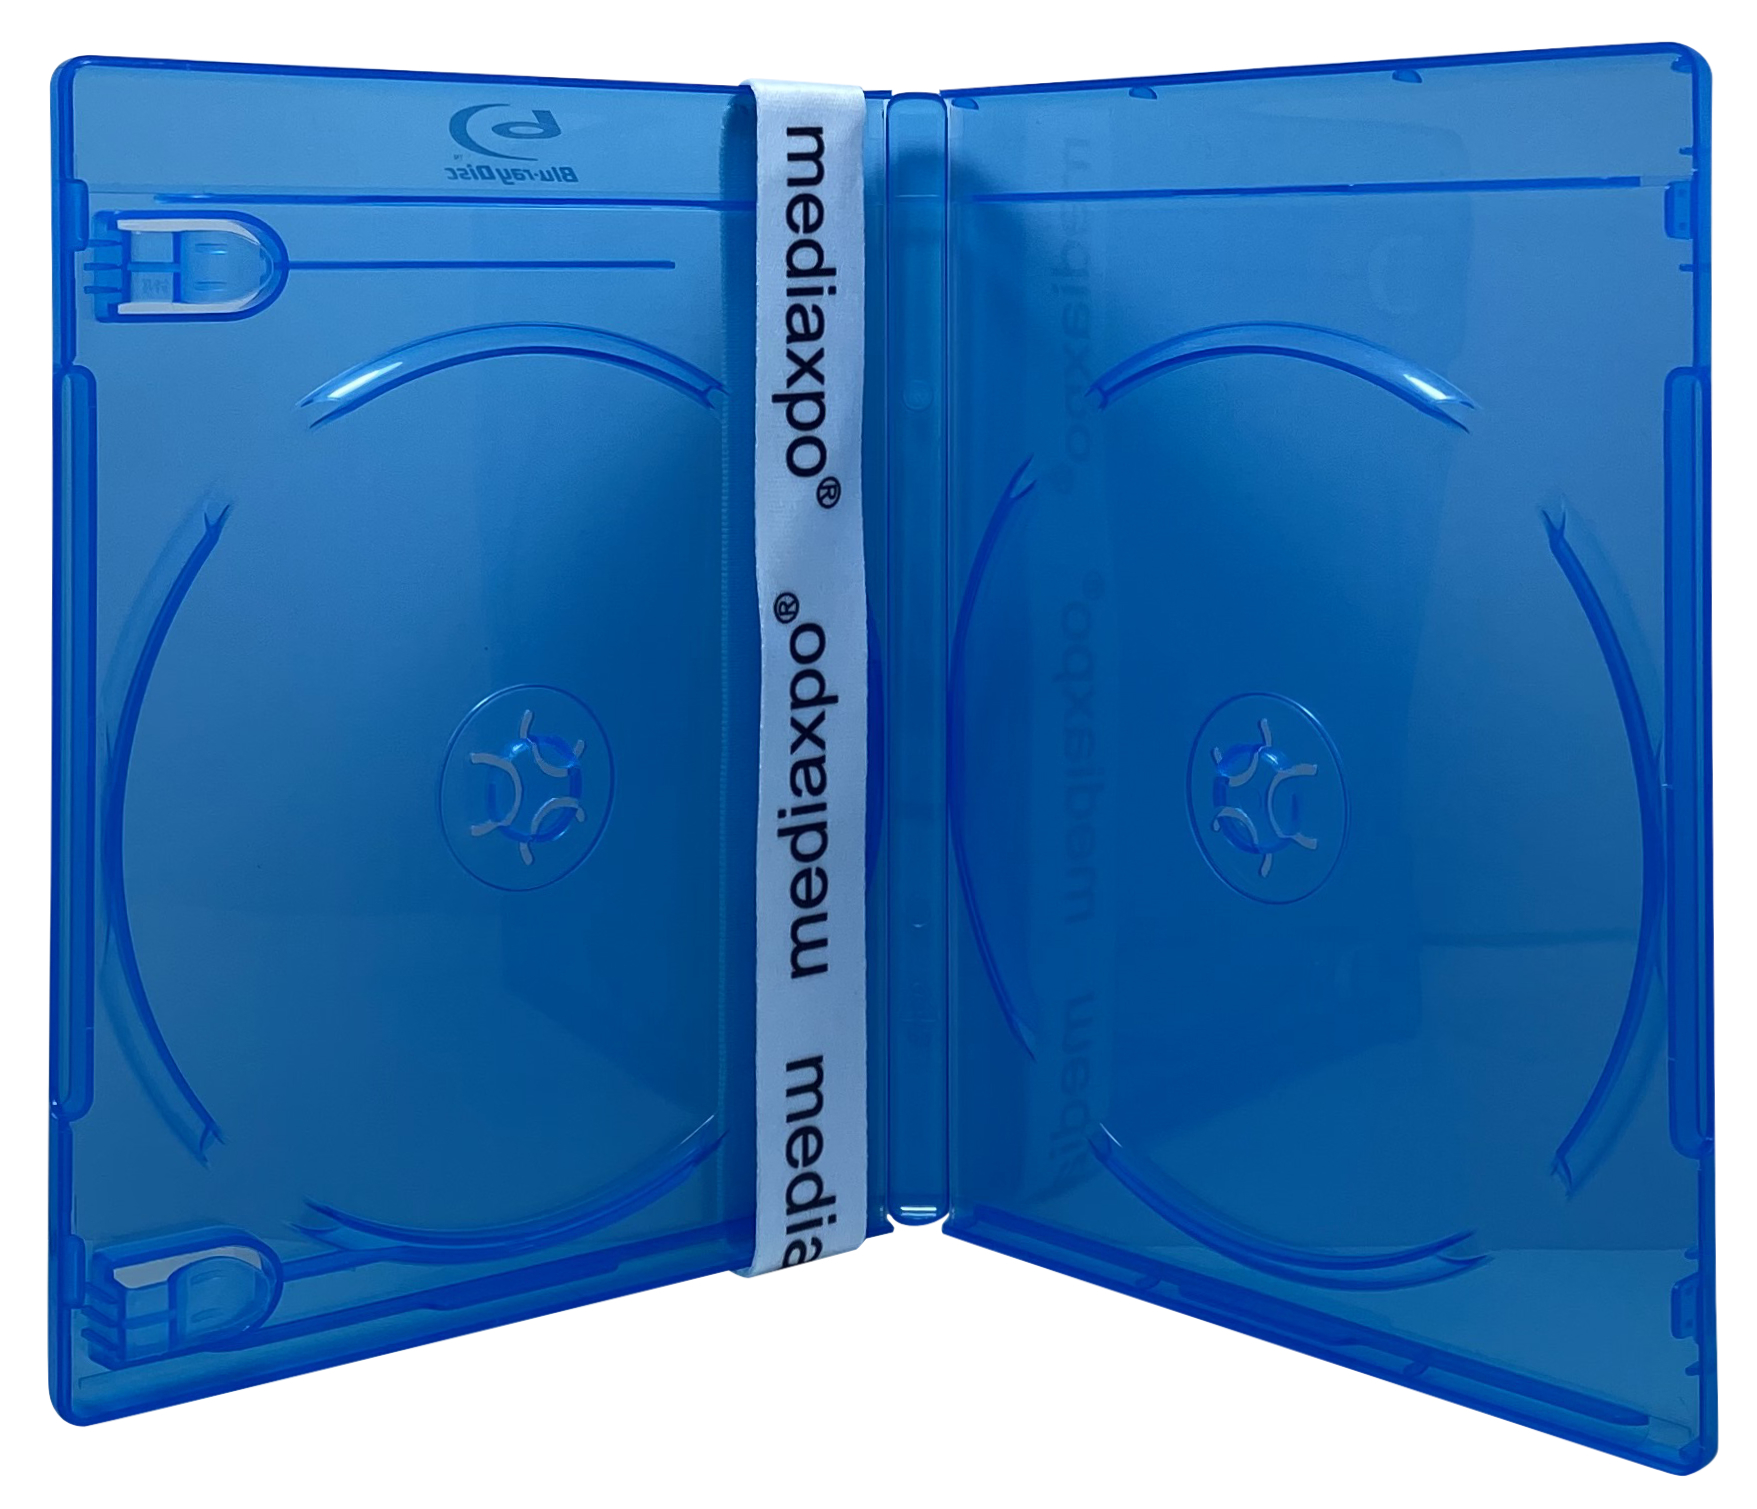 400 PREMIUM STANDARD Blu-Ray Double Cases 12MM